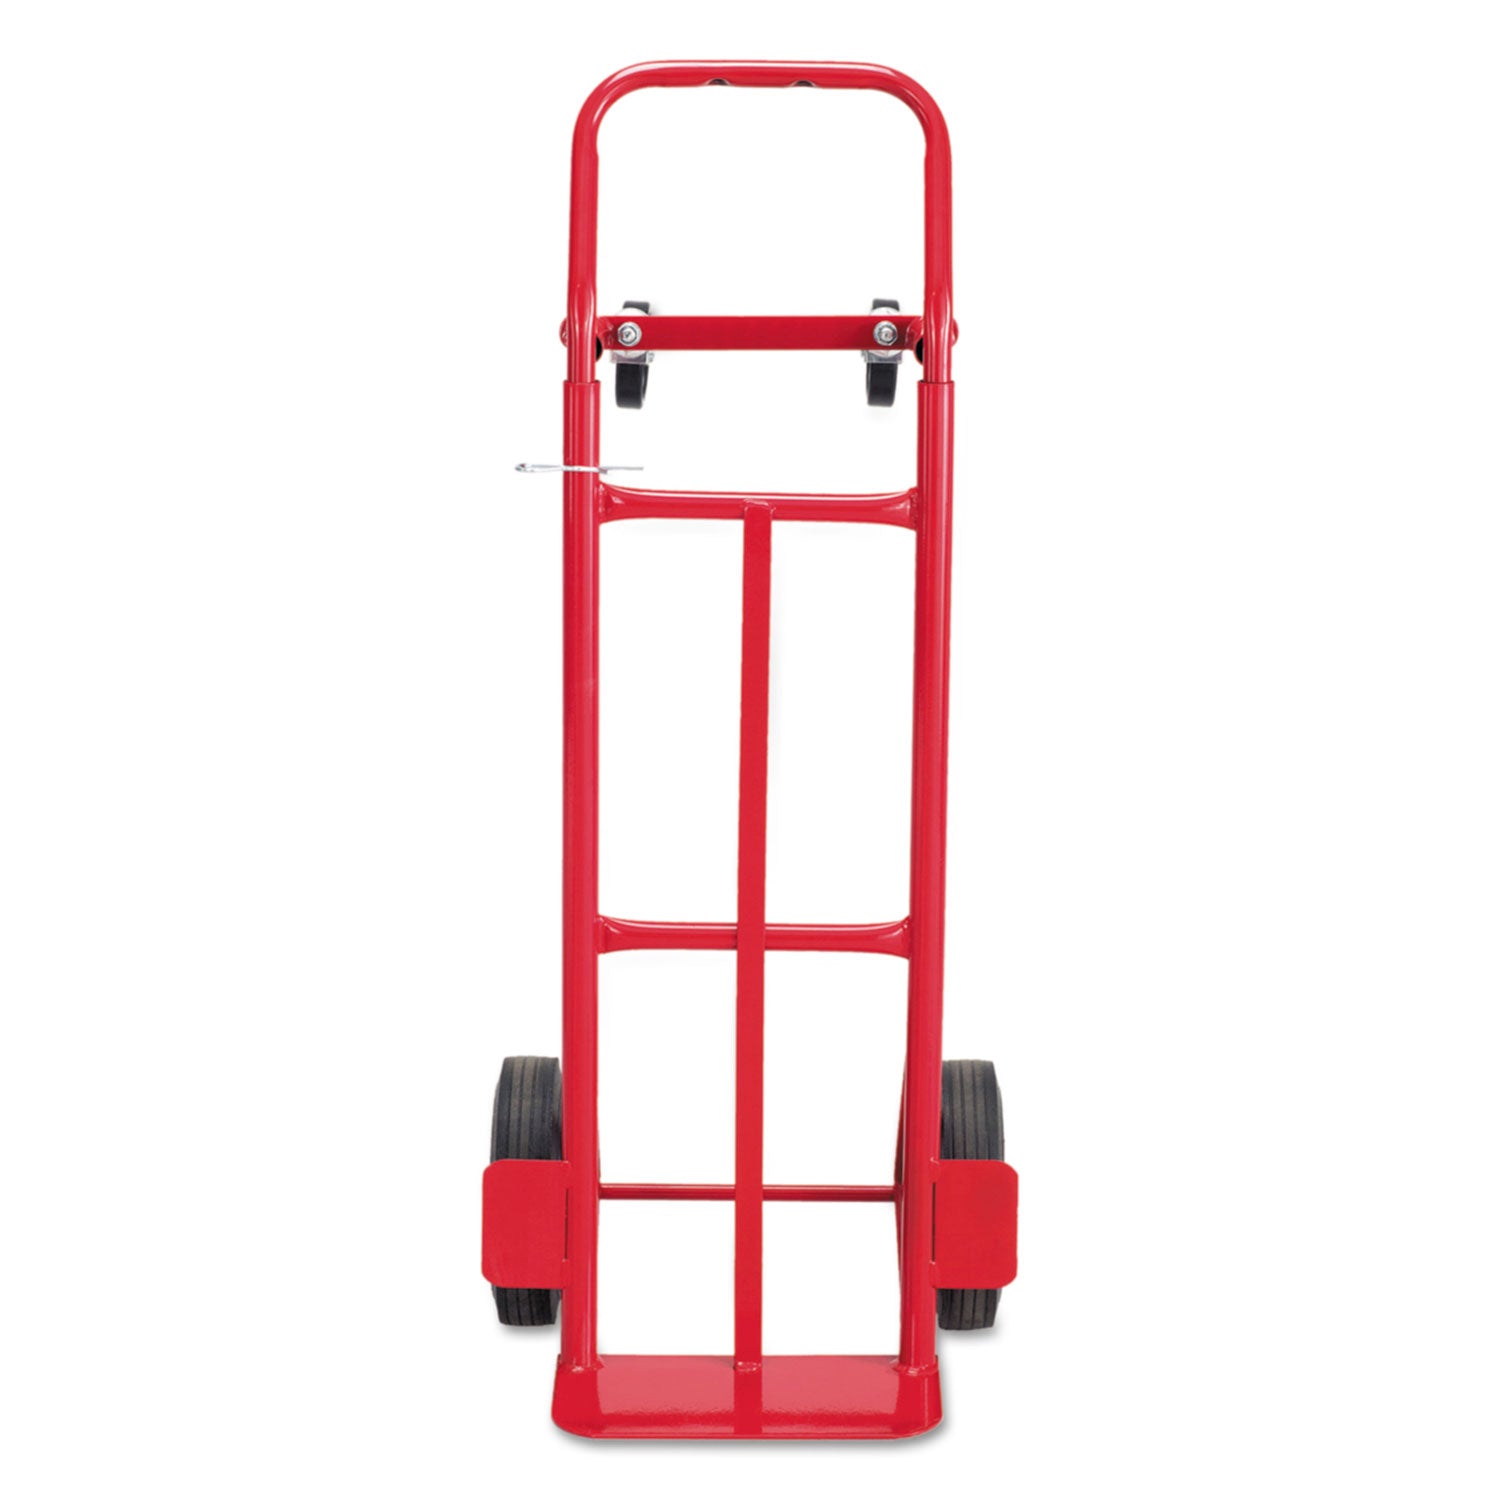 Two-Way Convertible Hand Truck, 500 to 600 lb Capacity, 18 x 51, Red - 